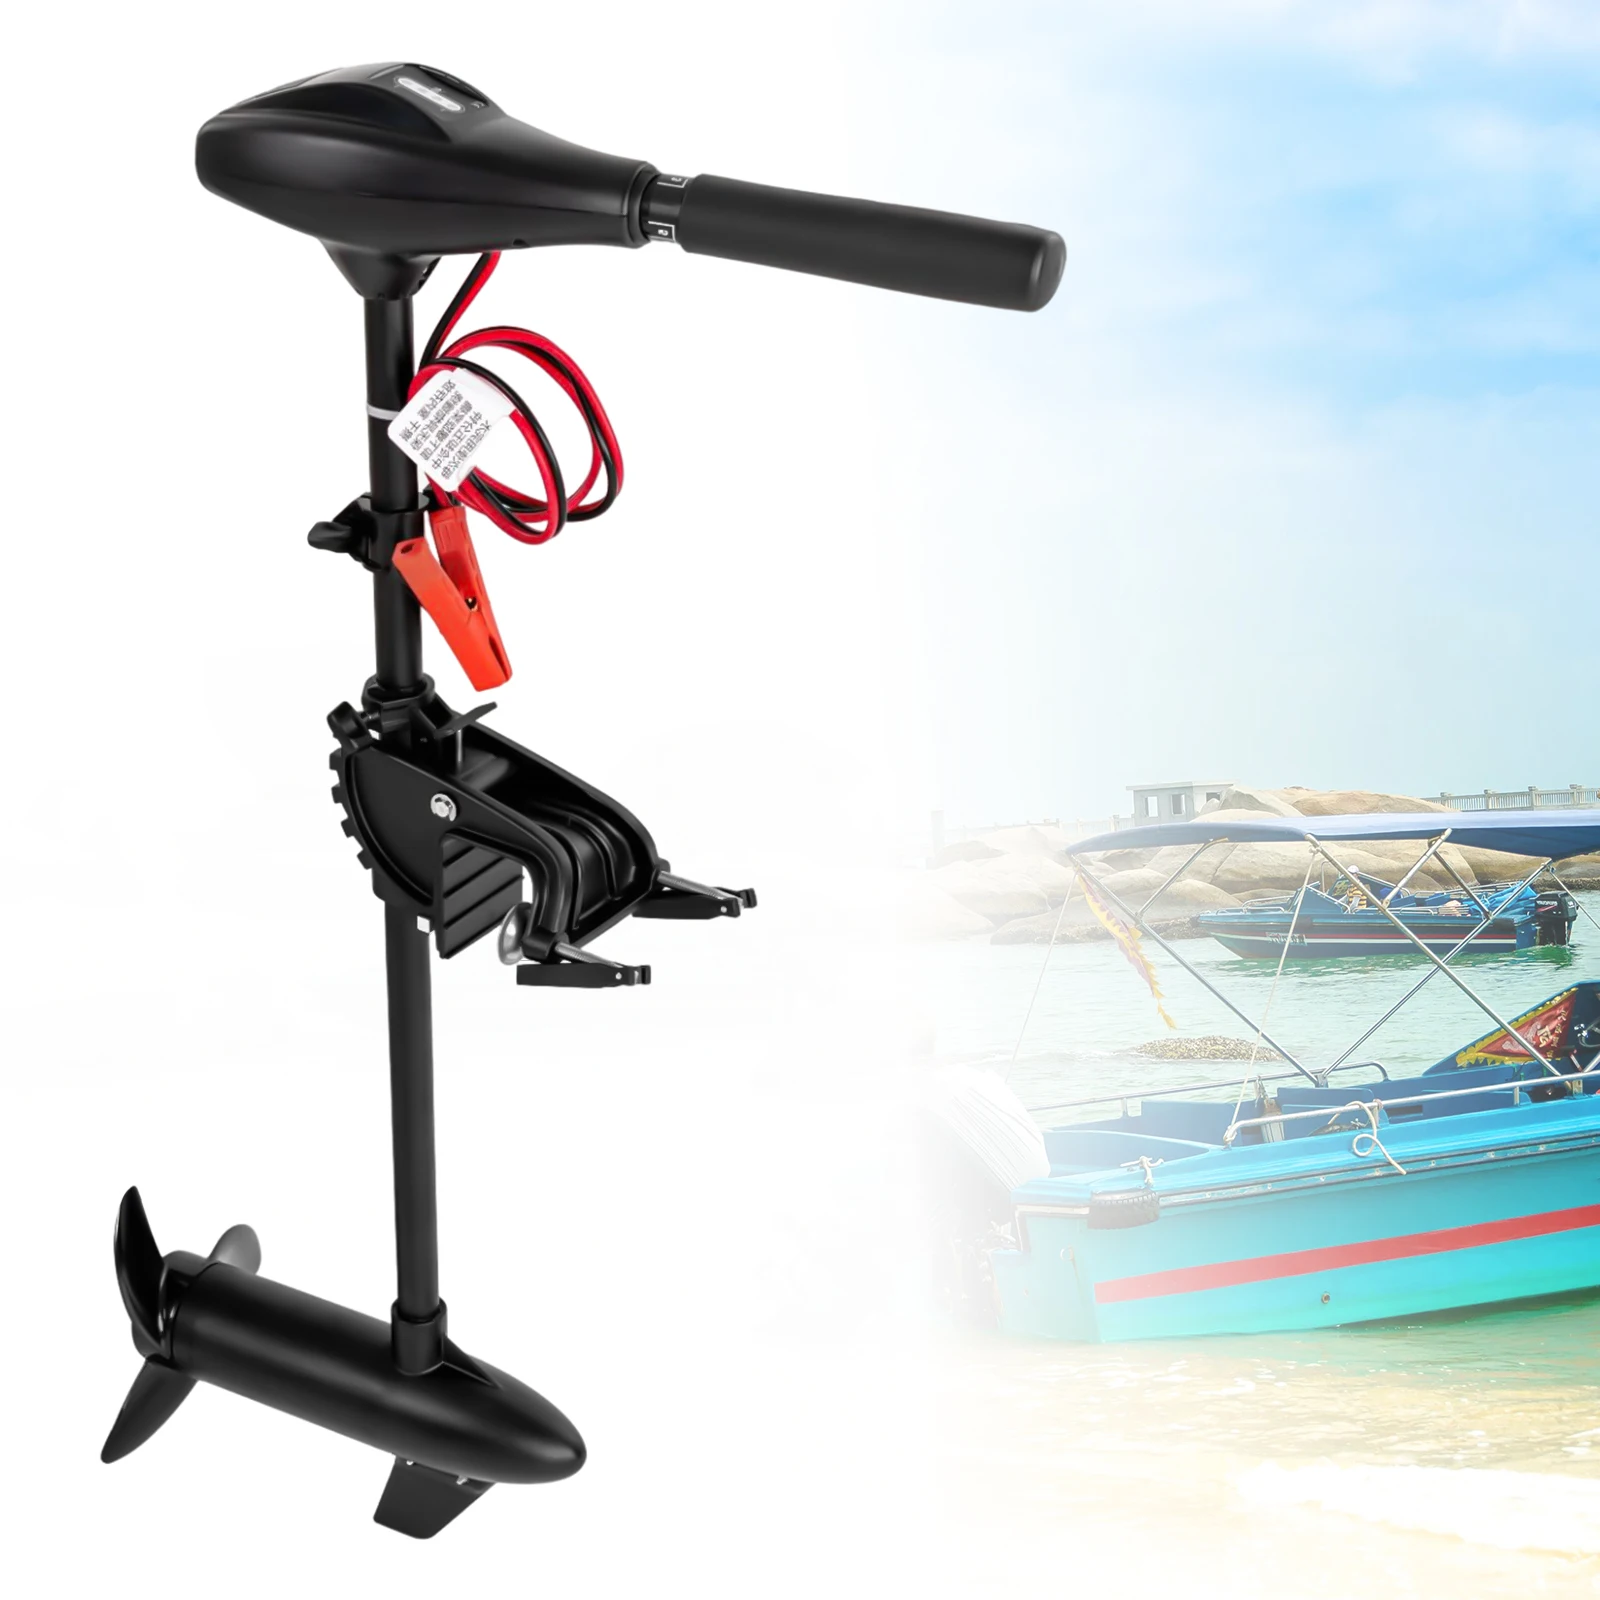 12V 58LB Thrust Electric Trolling Motor Outboard Engine For Fishing/ Inflatable Boats Brush Motor Propeller Strong Powe